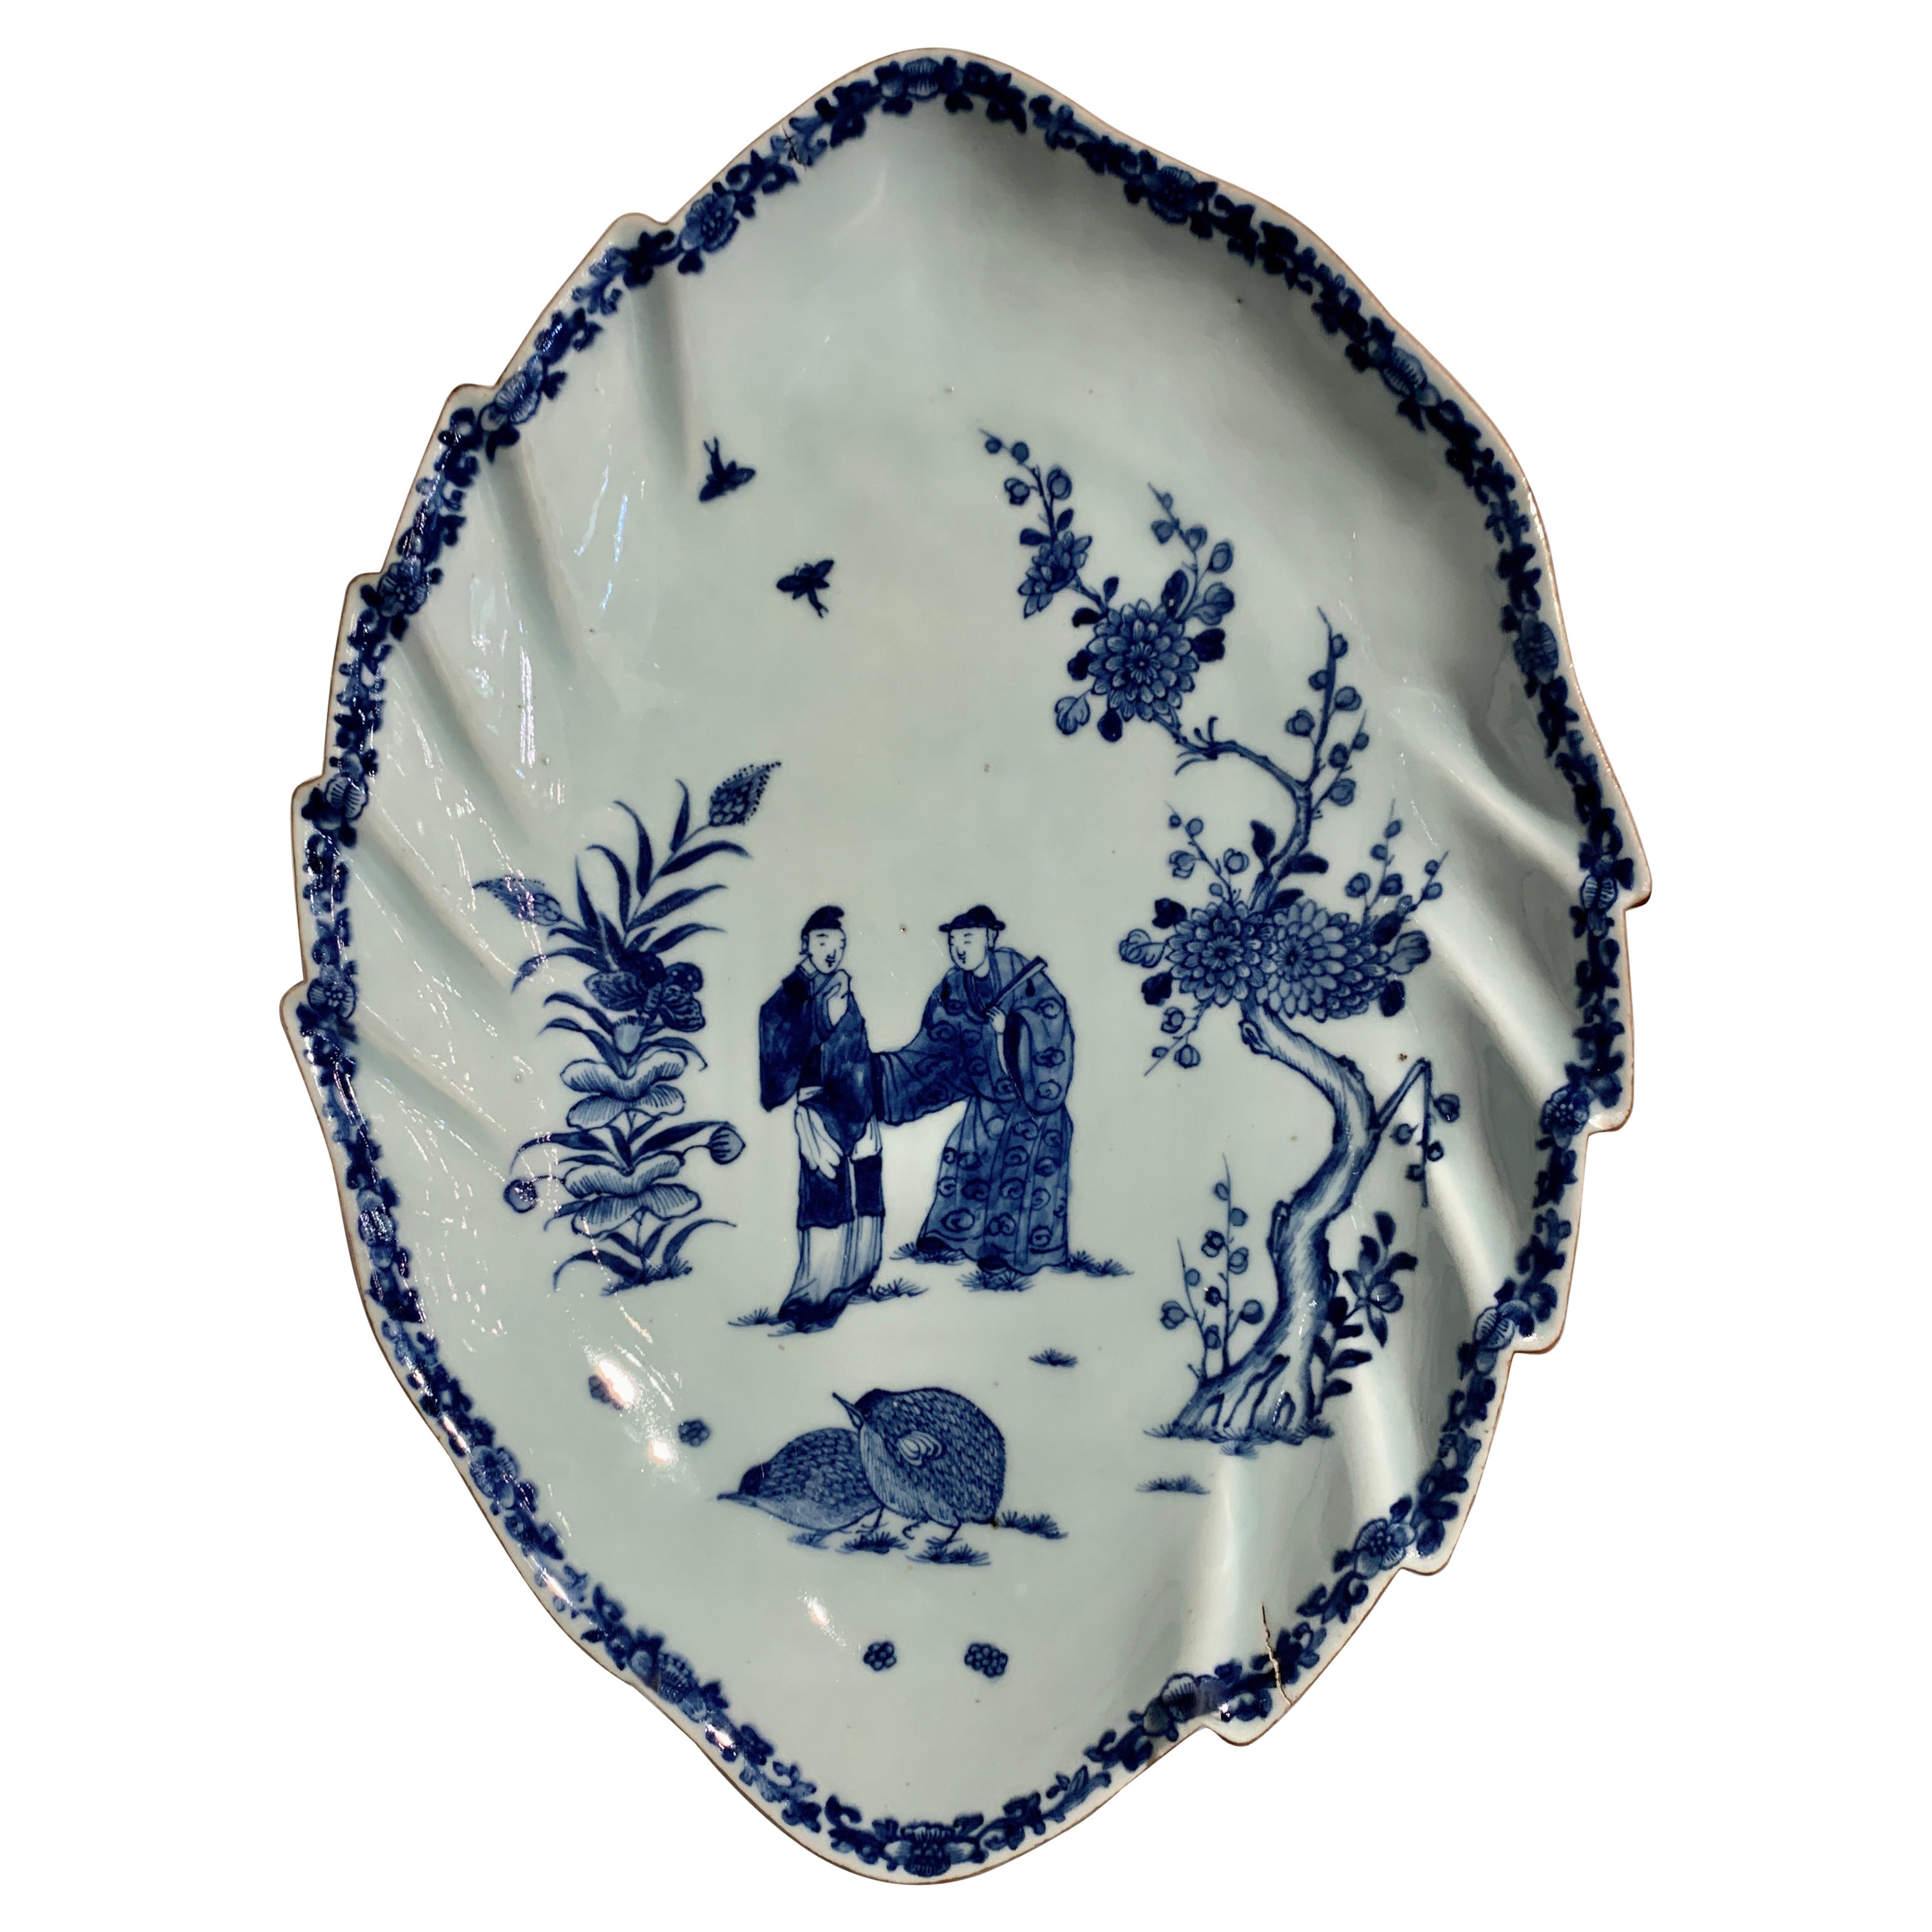 Chinese Export Blue and White Leaf Shaped Dish, Qianlong, Mid 18th Century